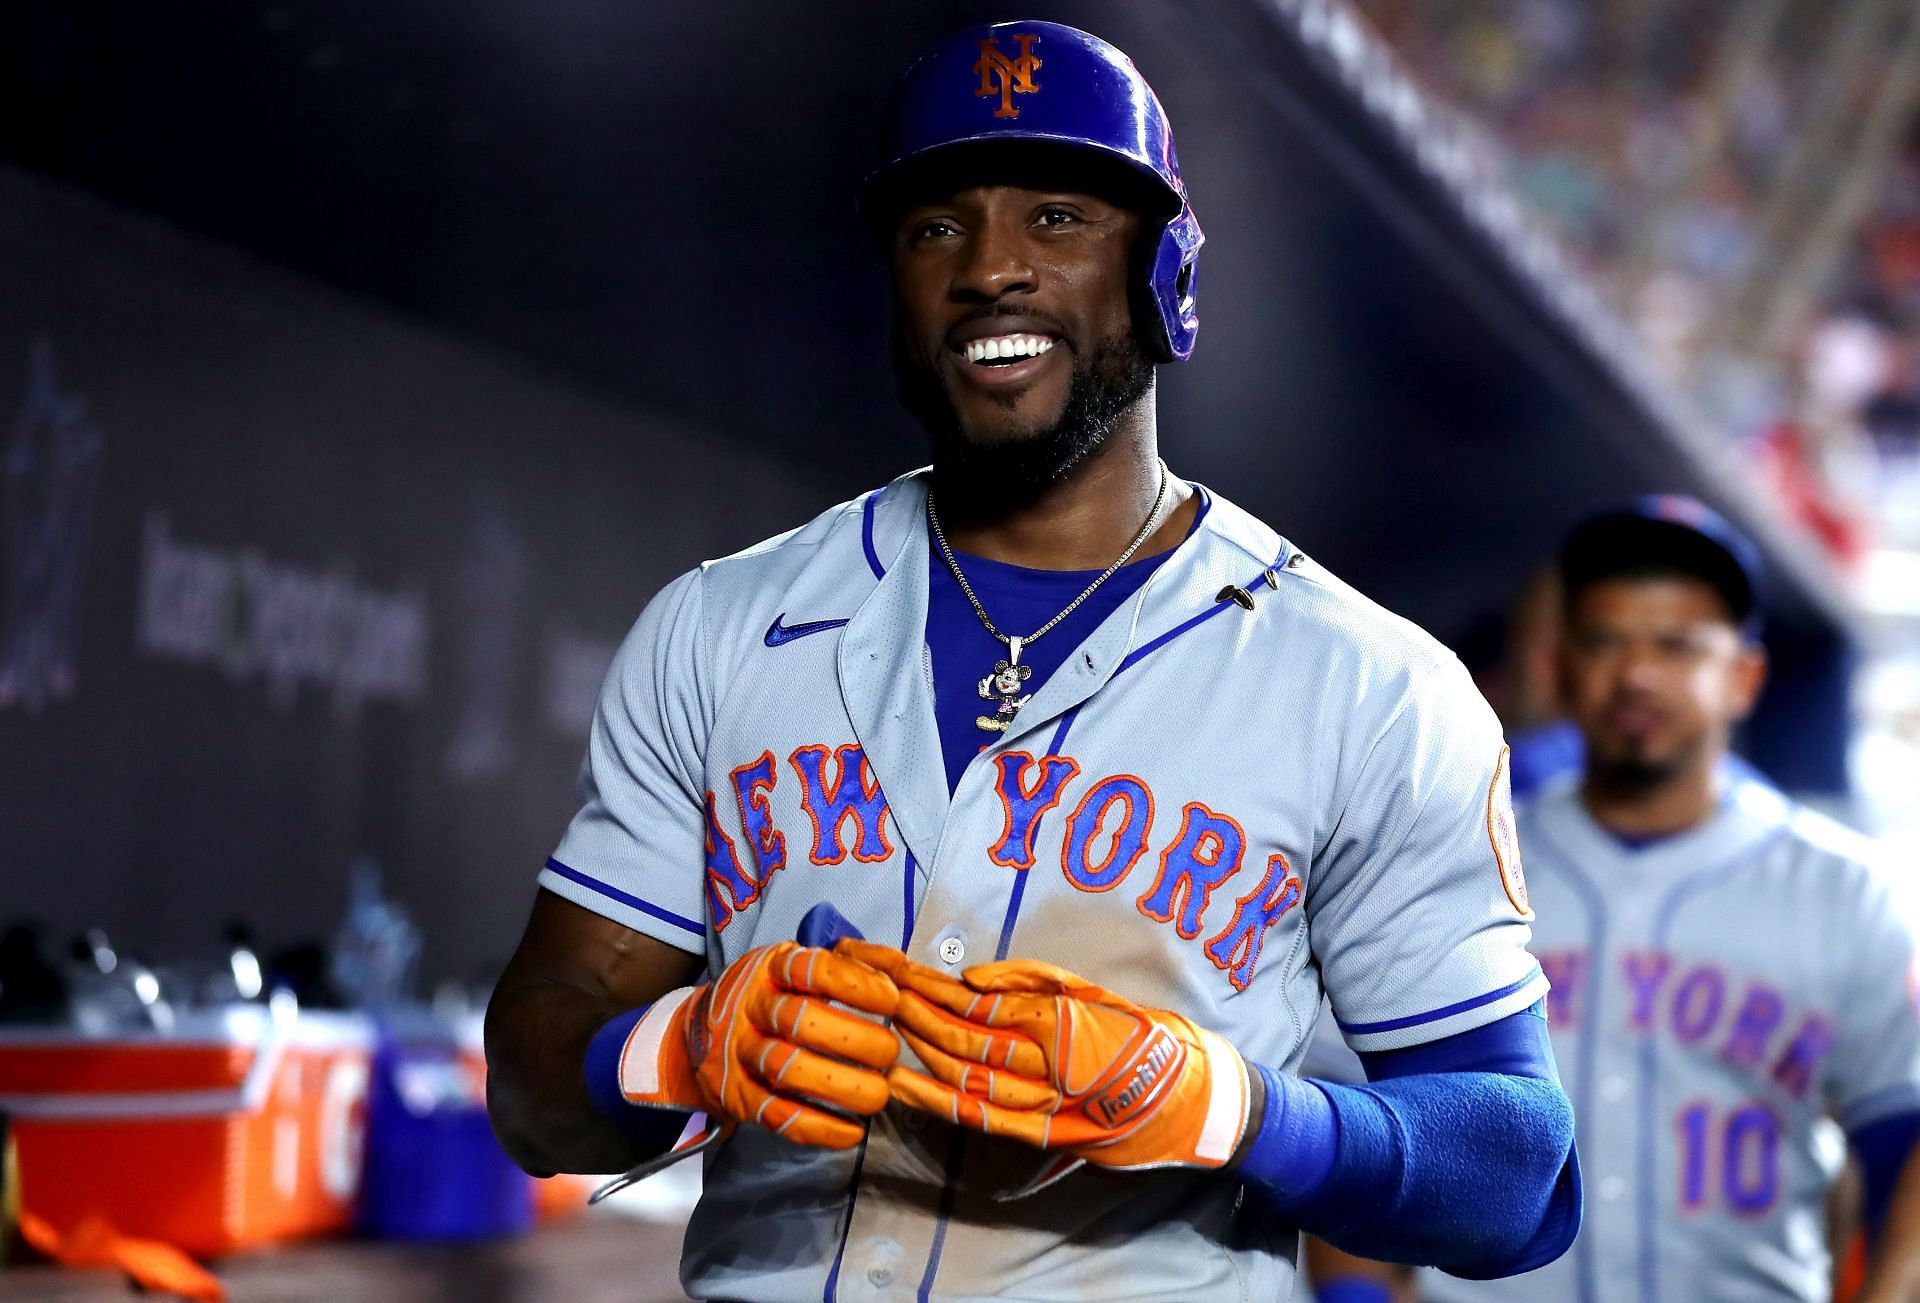 Former Marlin Starling Marte leads the Mets with a batting average of .305.